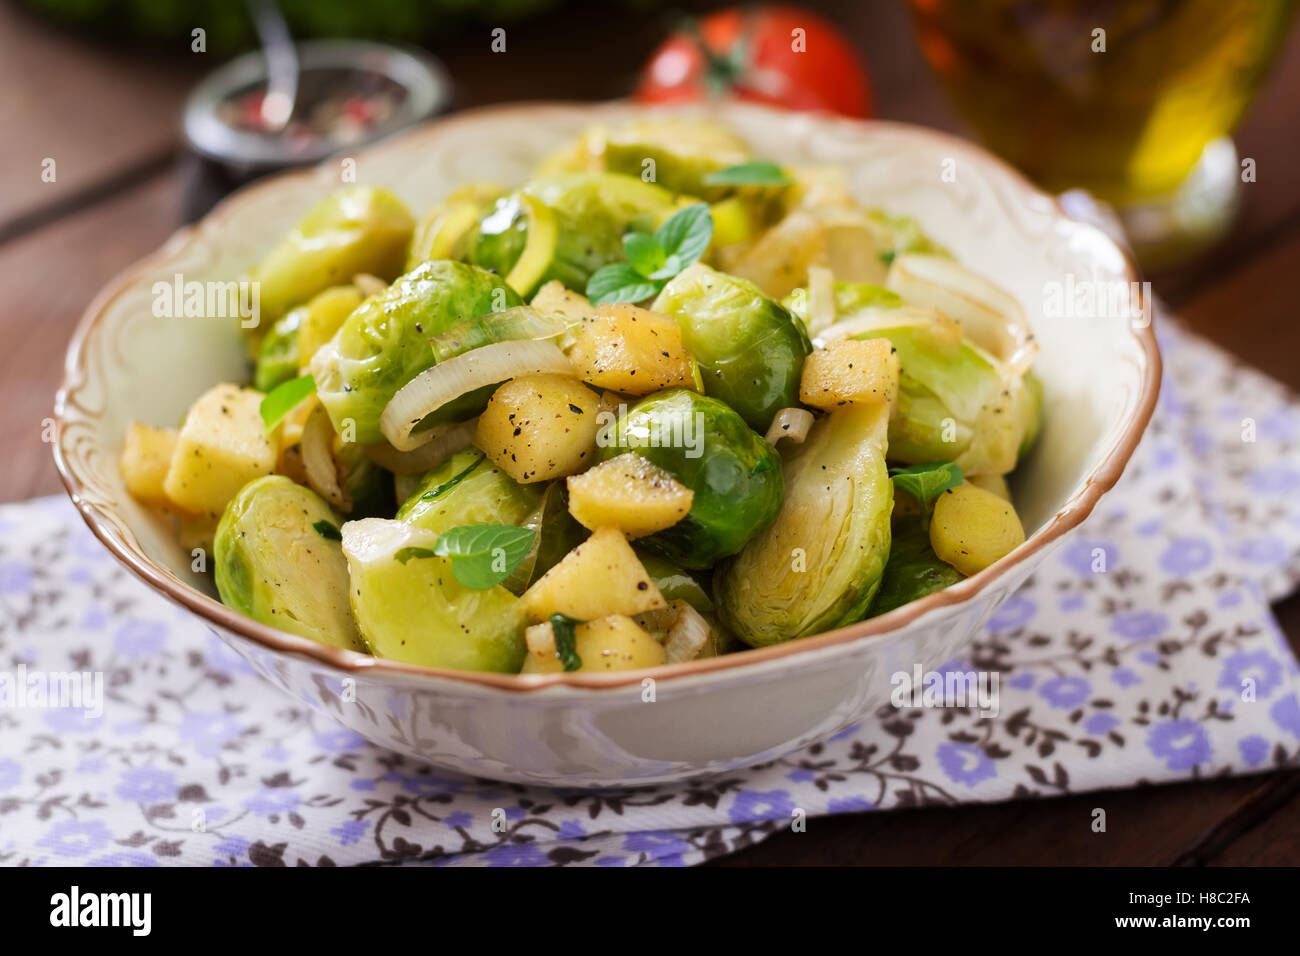 Stewed Brussels cabbage sprouts, apples and leeks in bowl. Dietary menu. Stock Photo